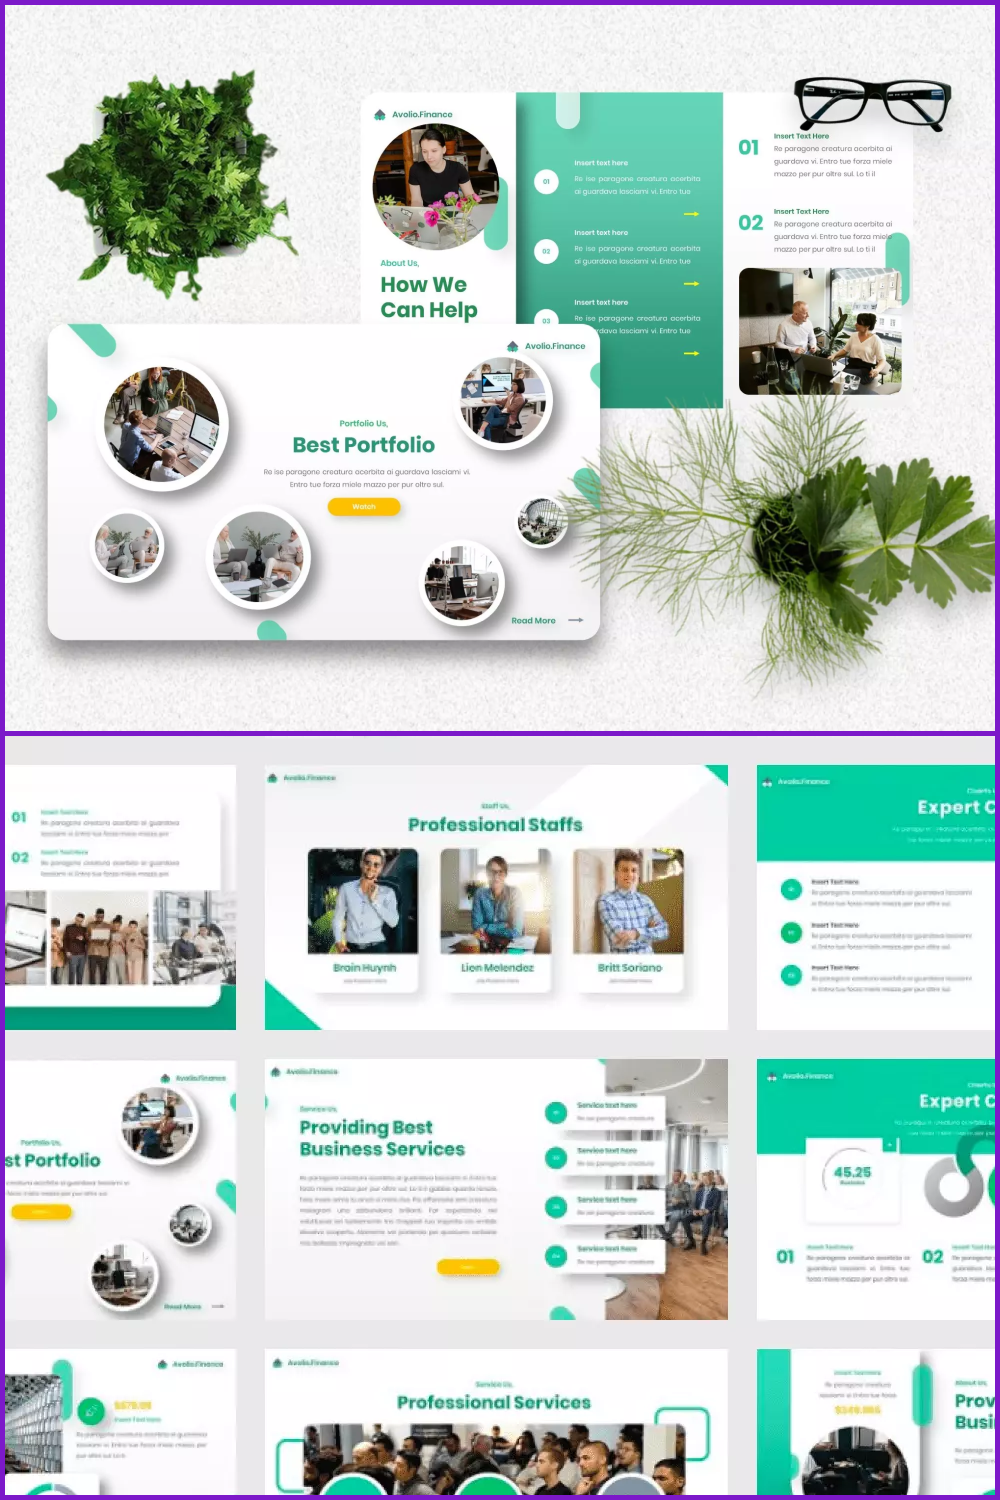 Presentation slides with rounded photos and green accents